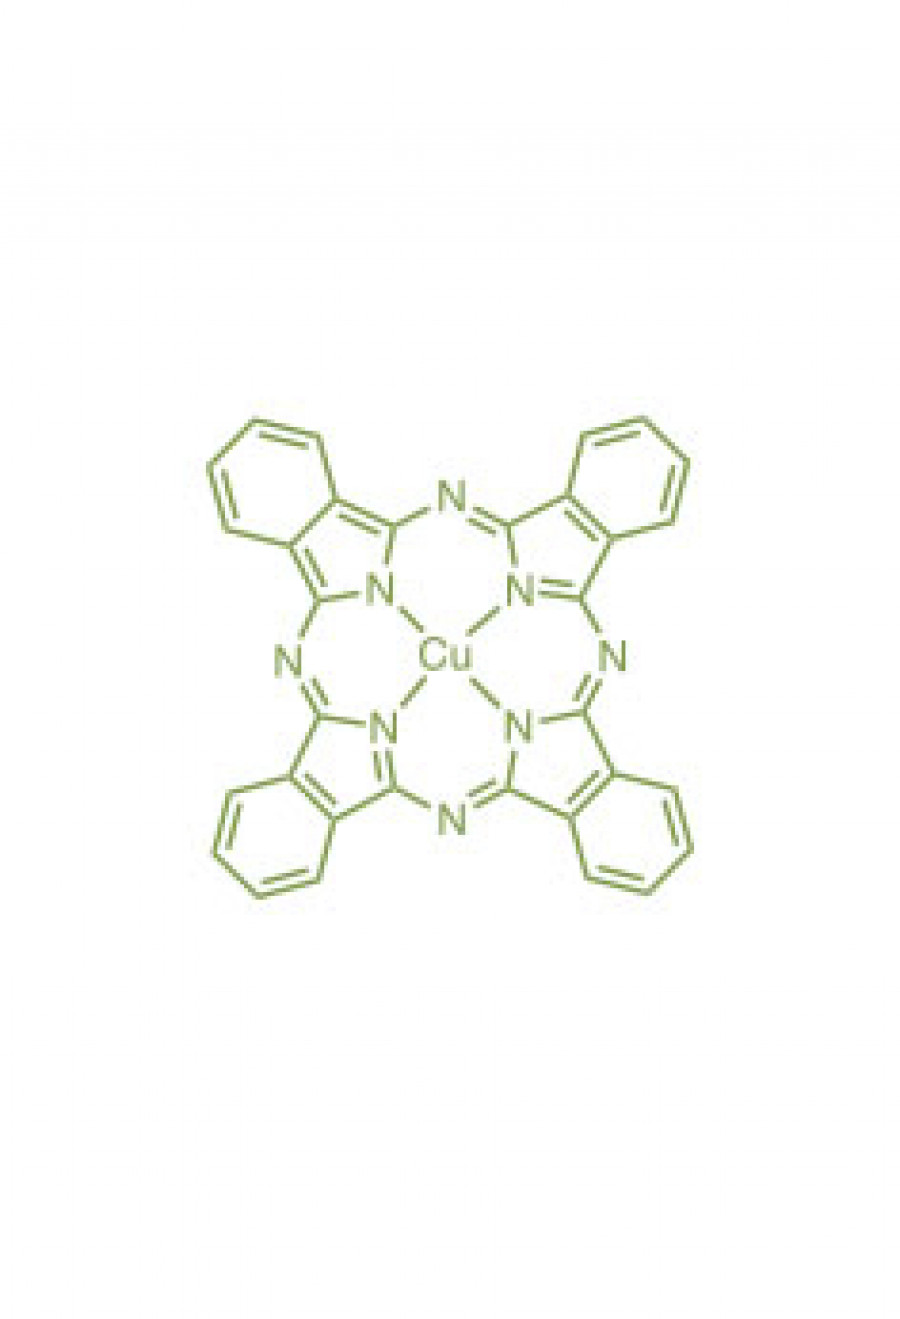 copper(II) phthalocyanine  | Porphychem Expert porphyrin synthesis for research & industry